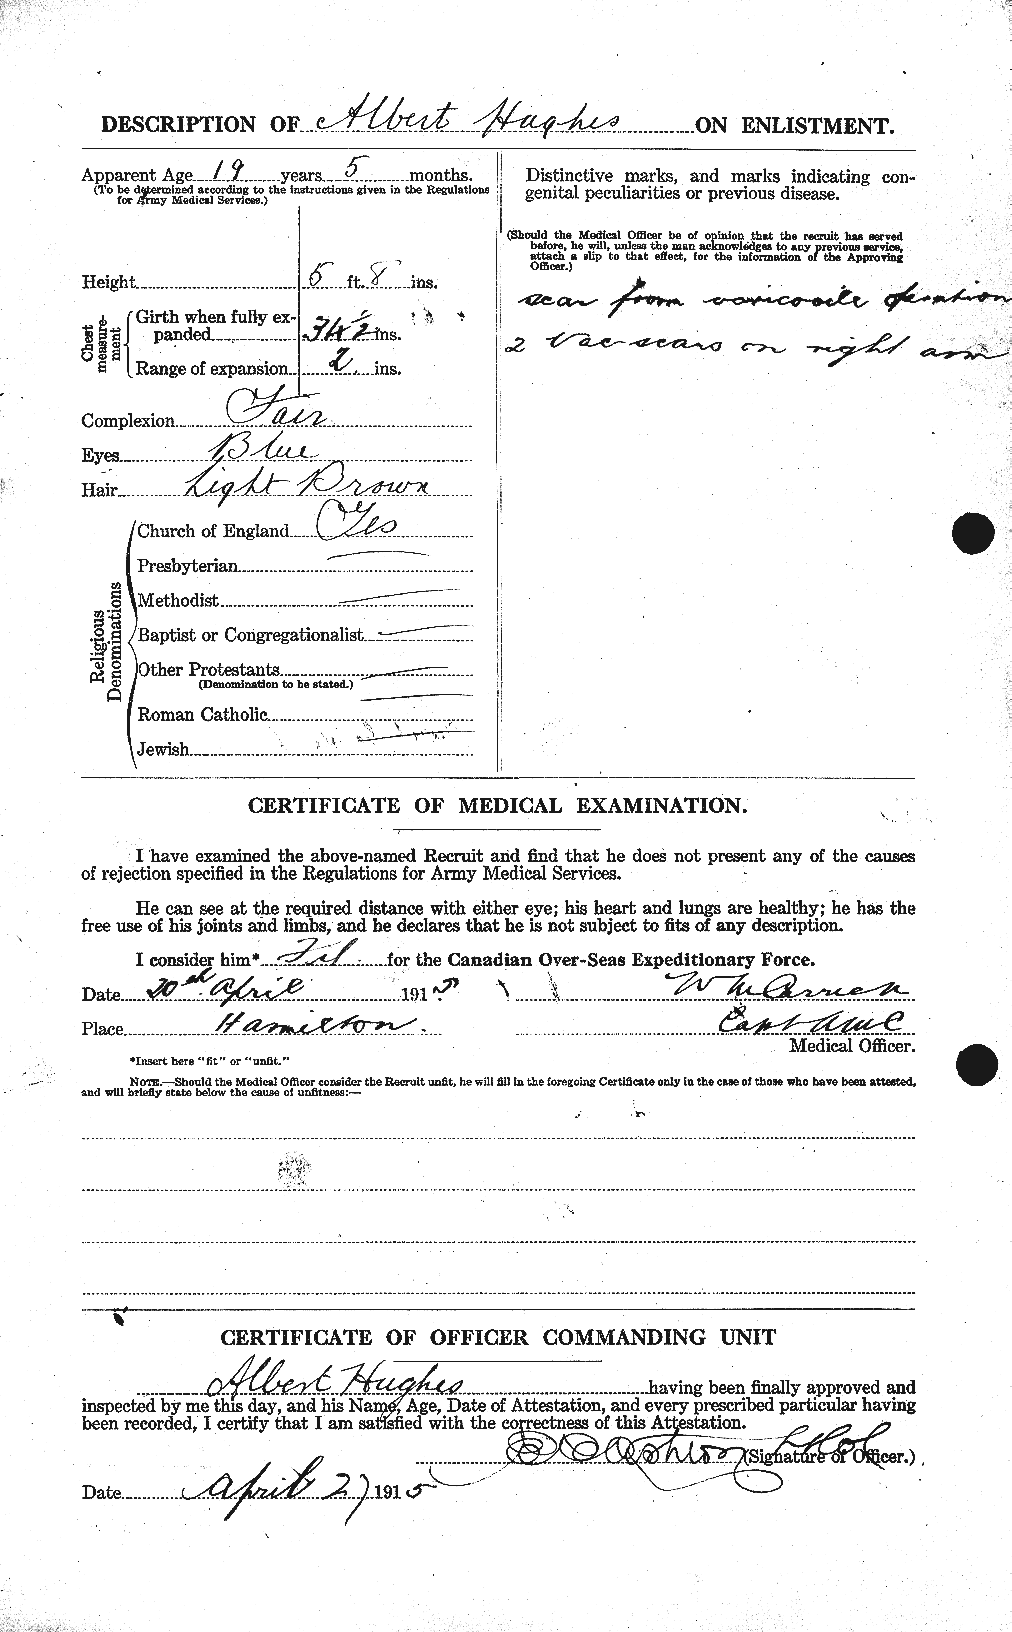 Personnel Records of the First World War - CEF 402525b